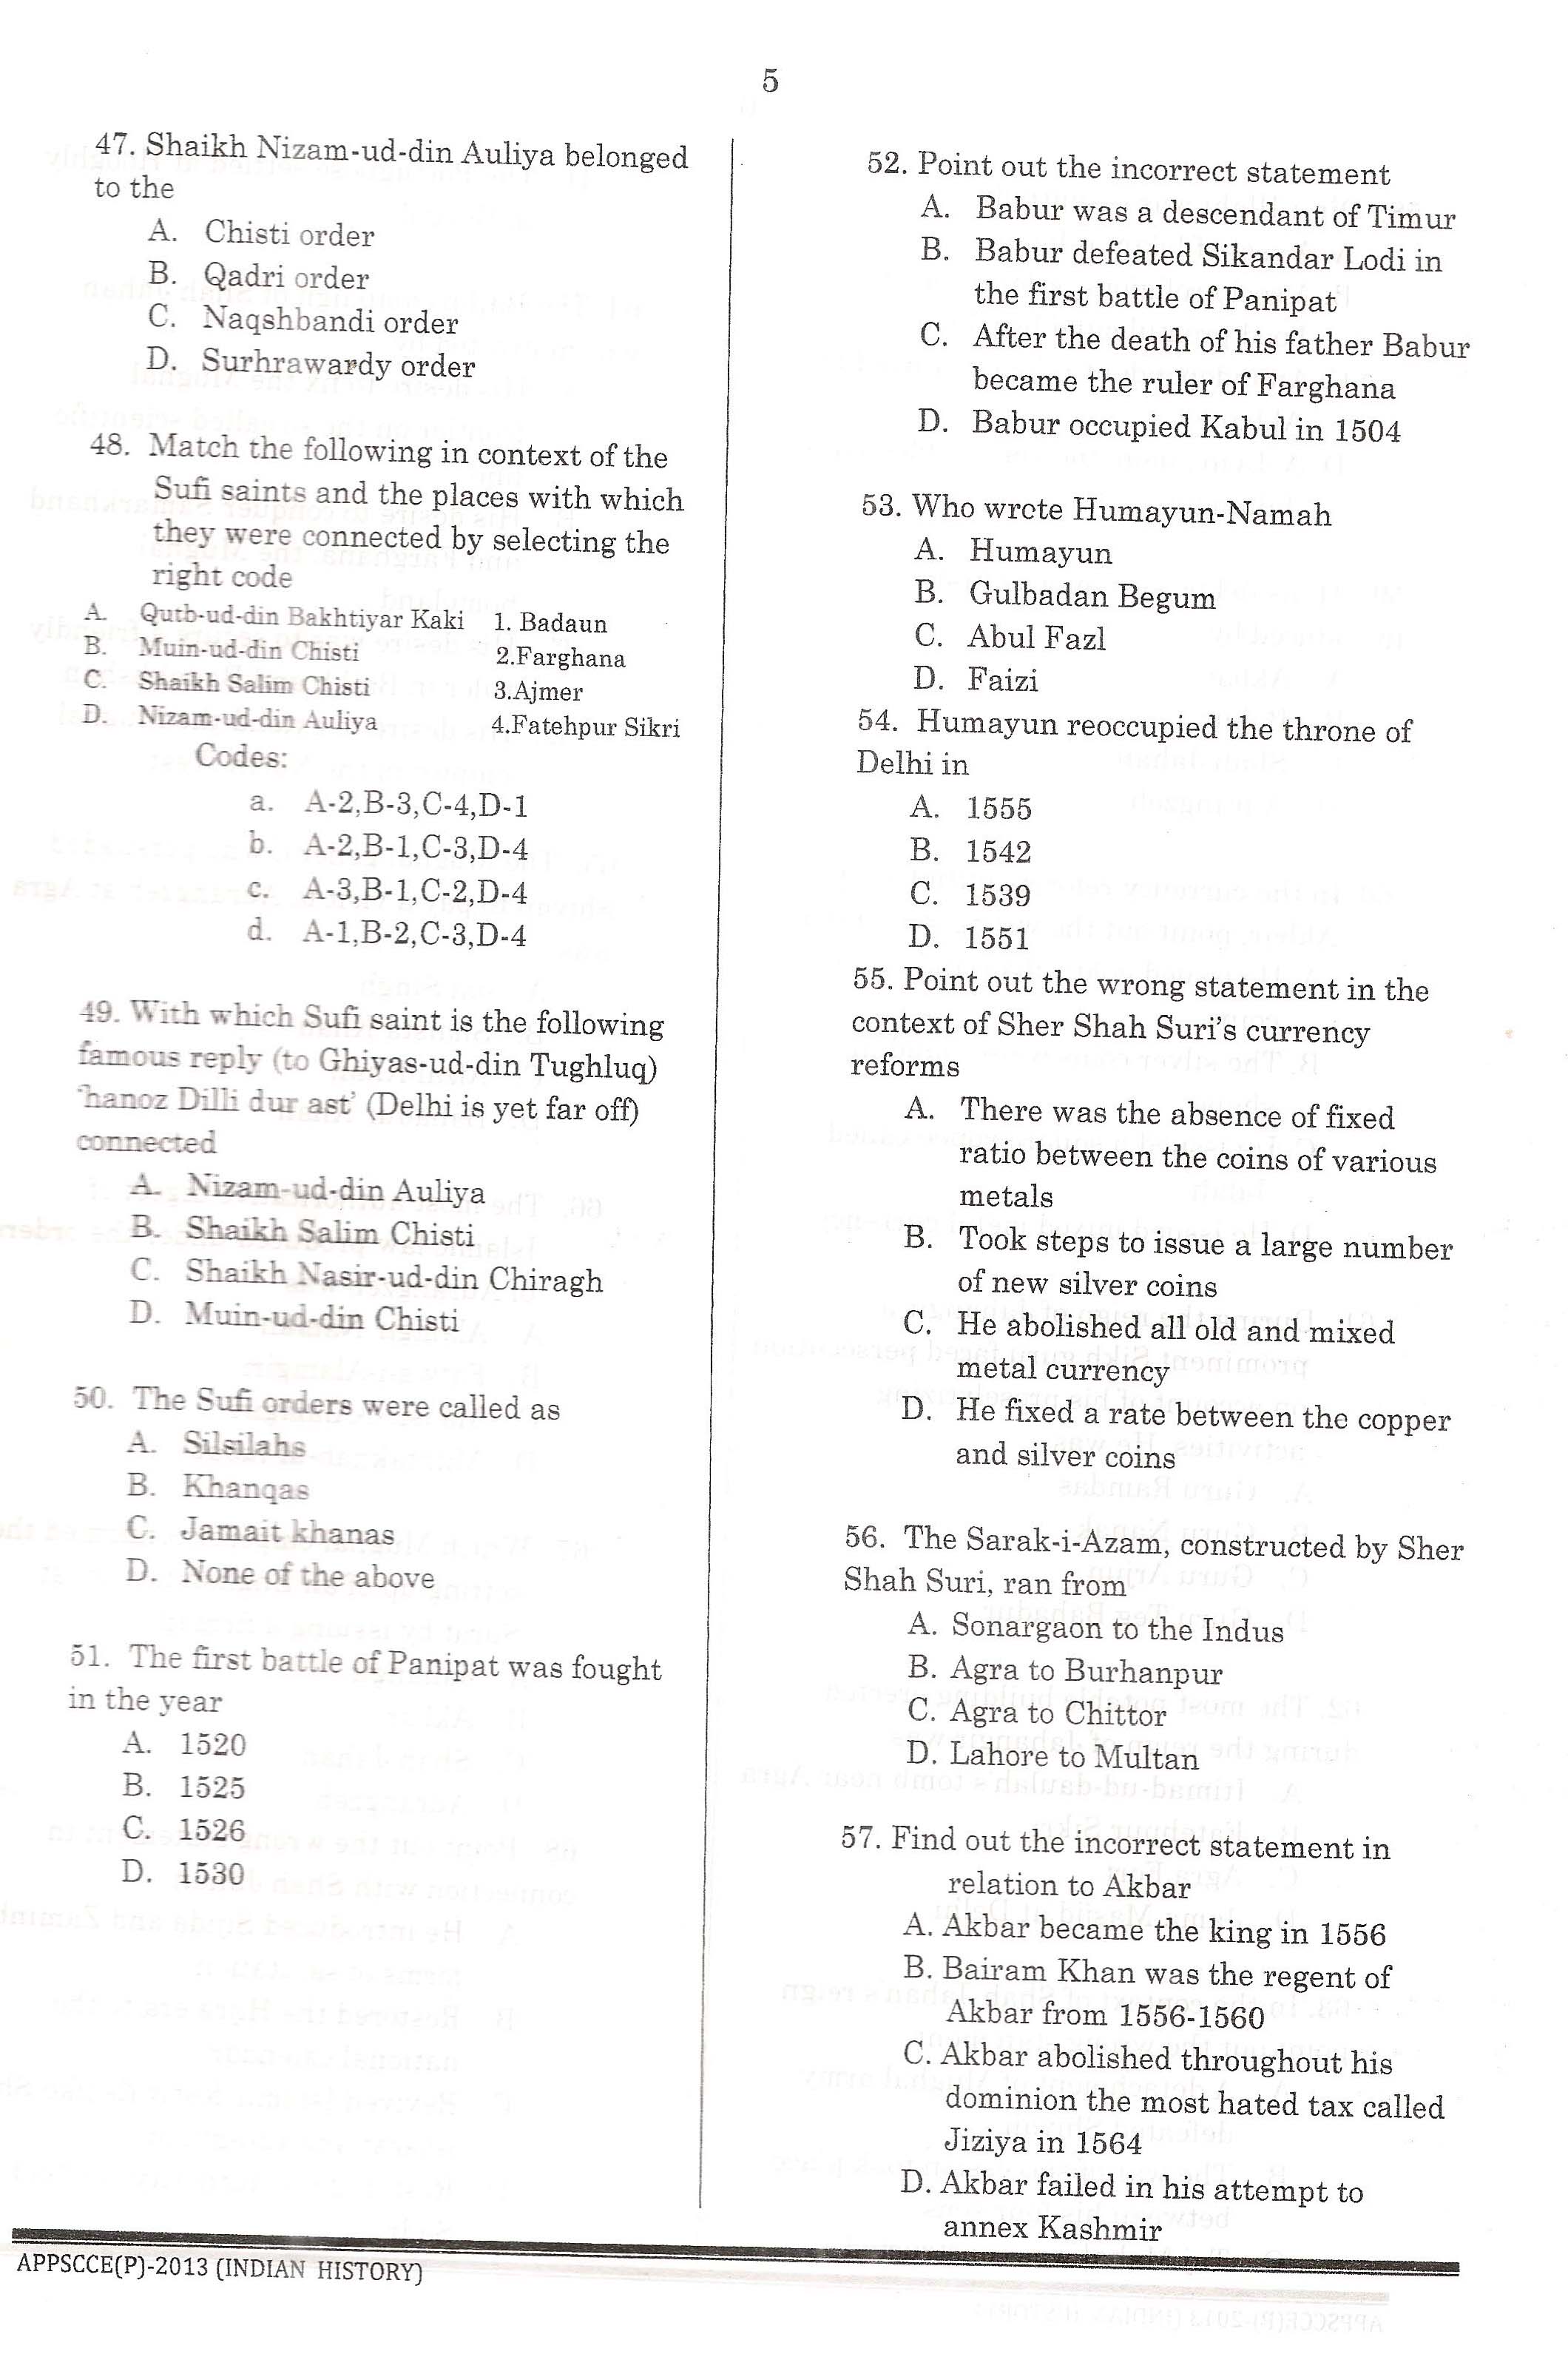 APPSC Combined Competitive Prelims Exam 2013 Indian History 6